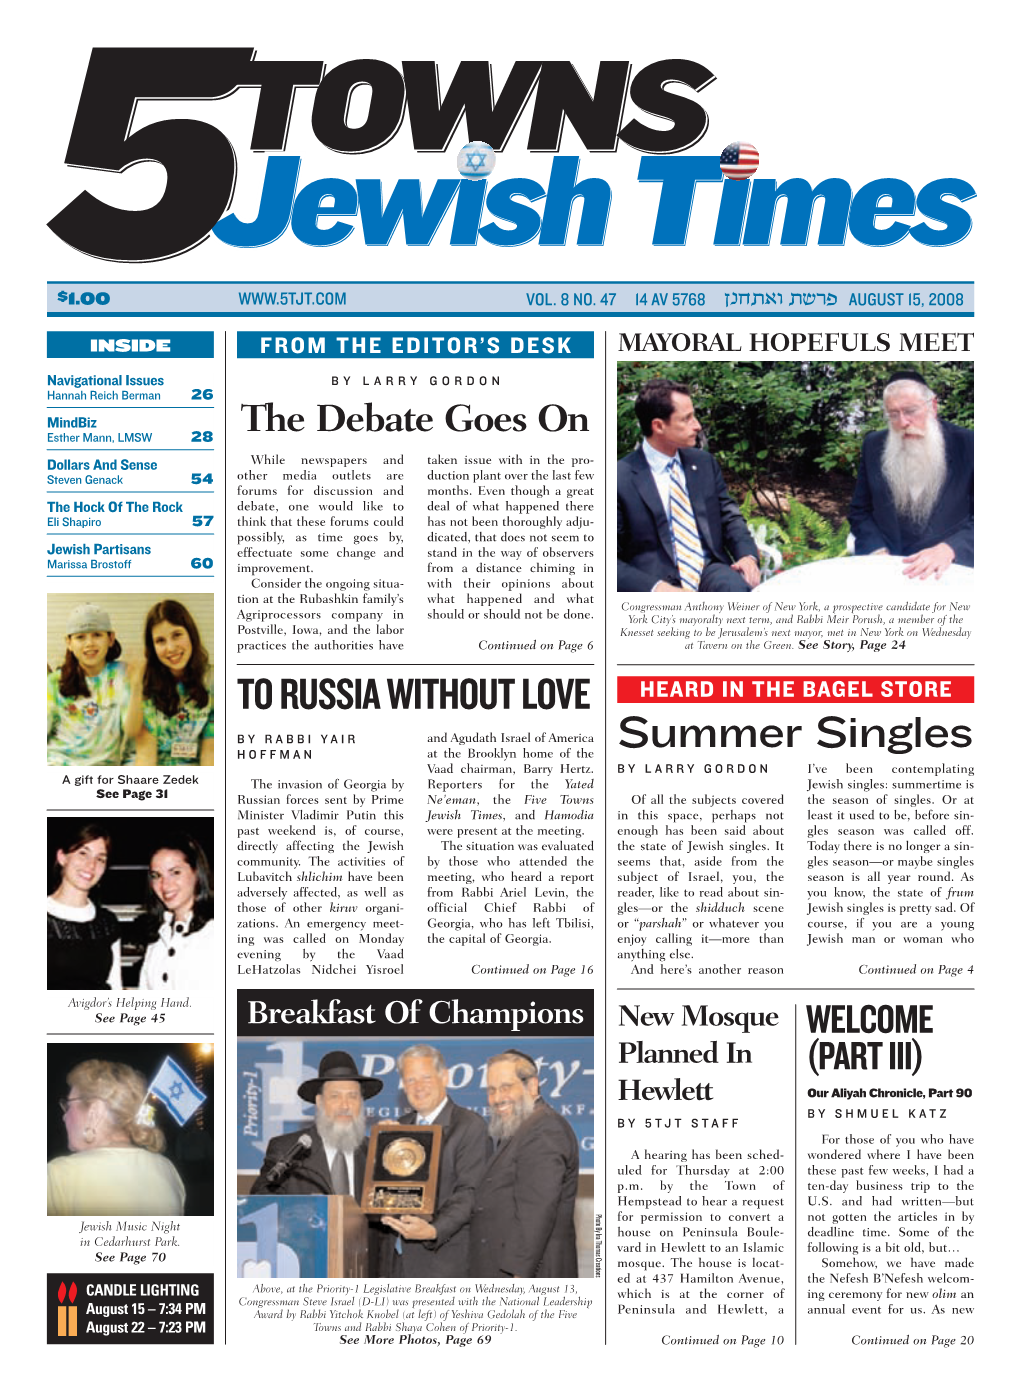 The 5 Towns Jewish Times!